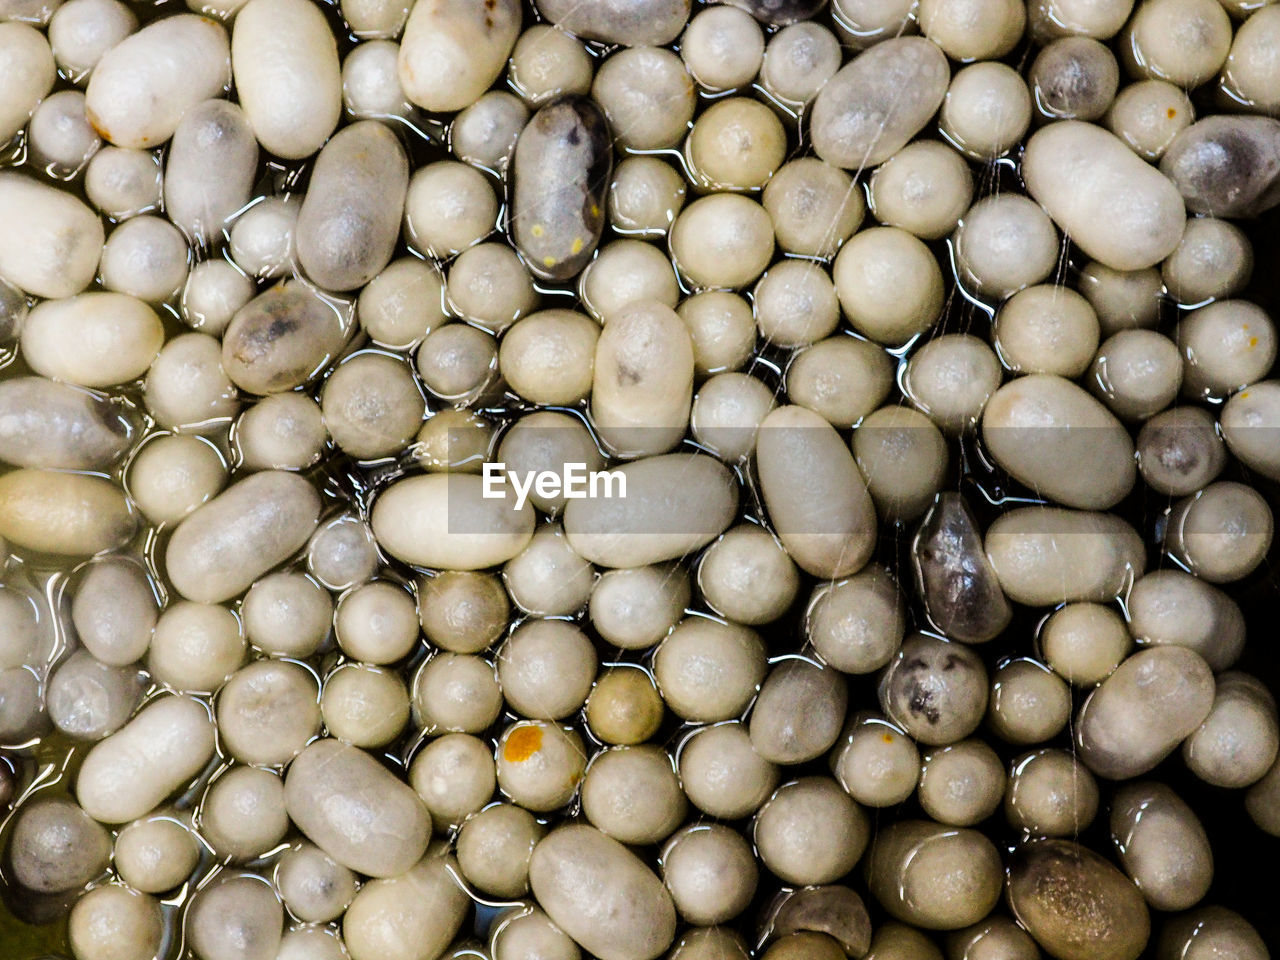 Full frame shot of silkworm cocoons in water